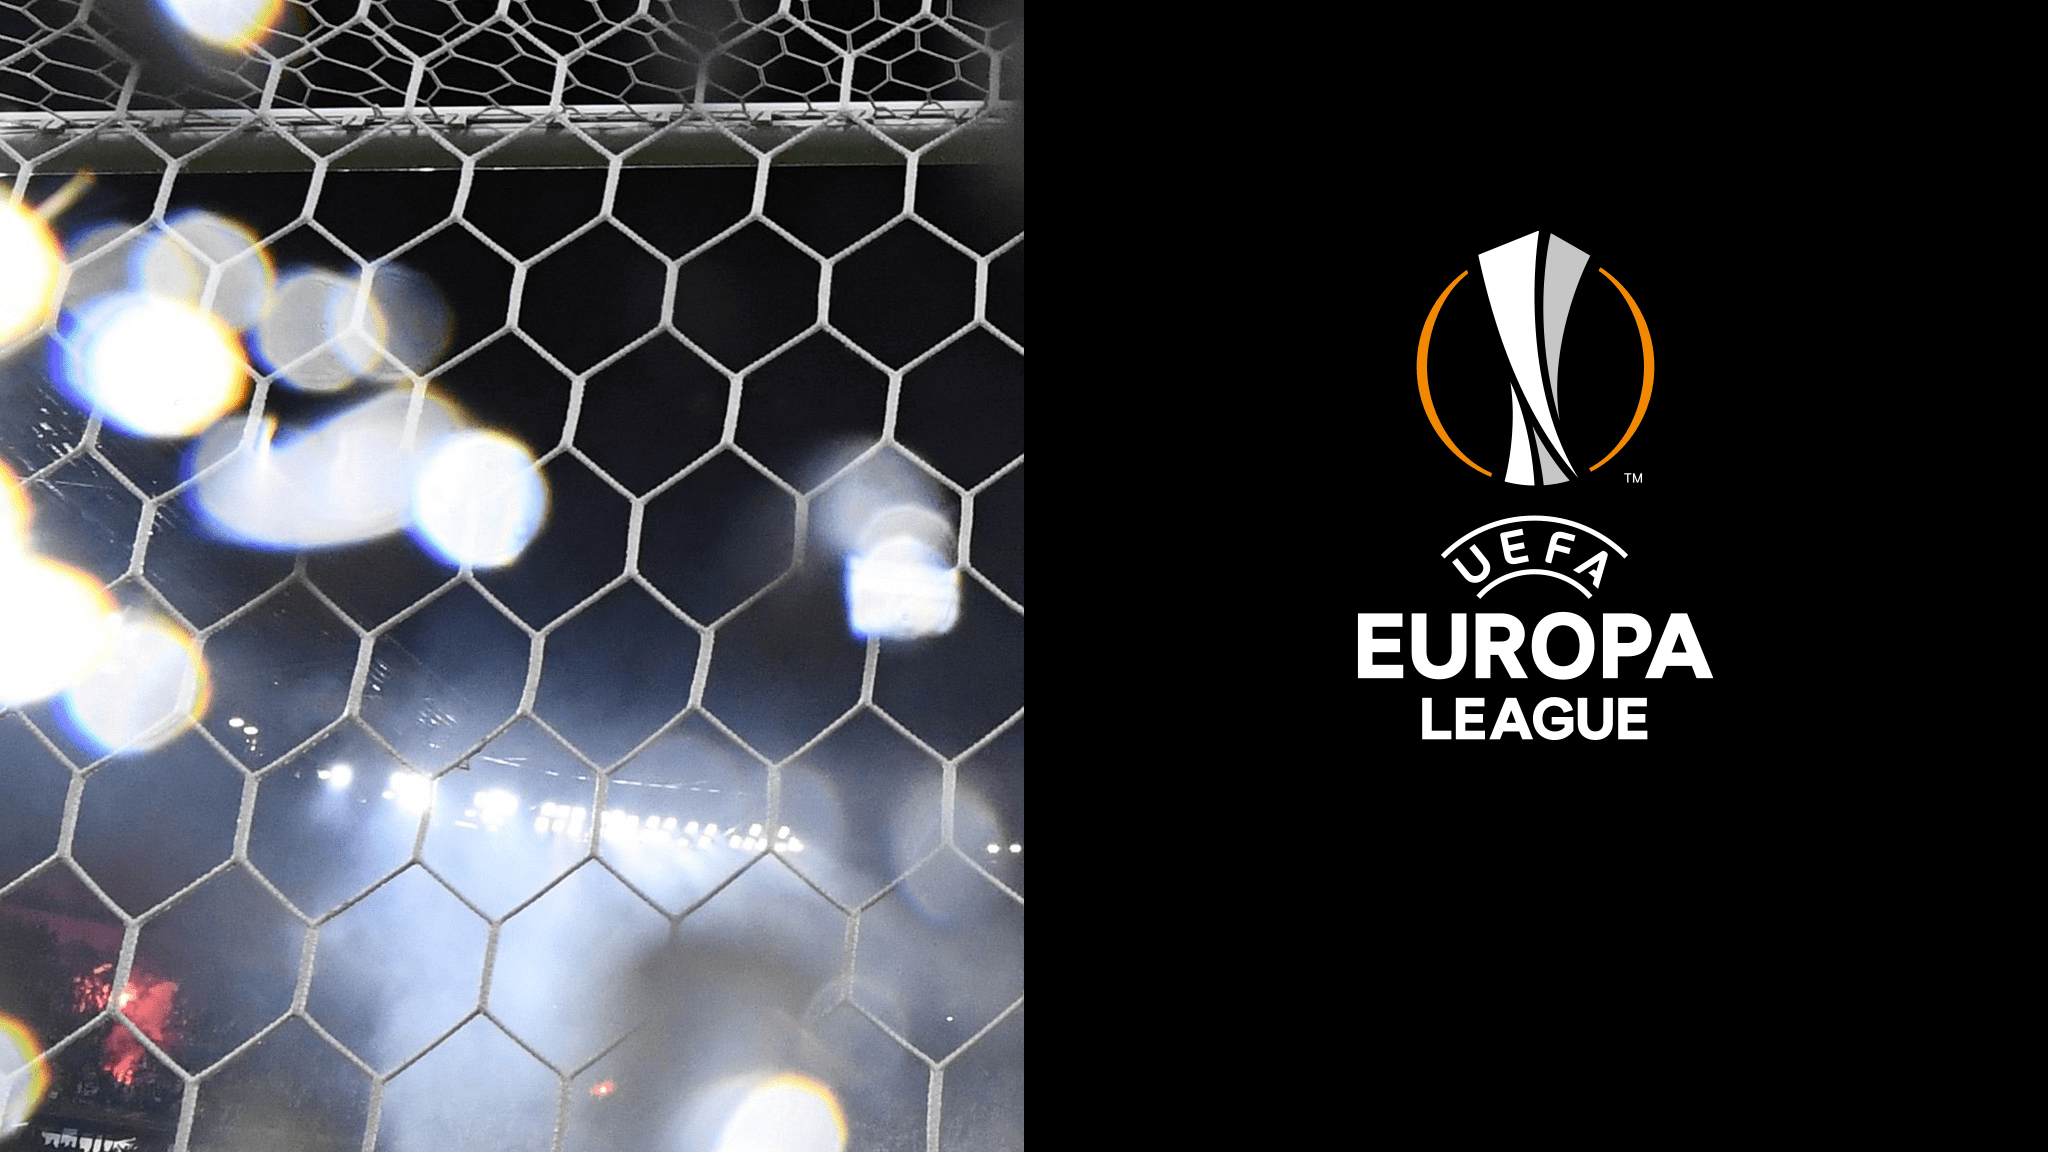 Europa League round of 16 betting tips for all matches